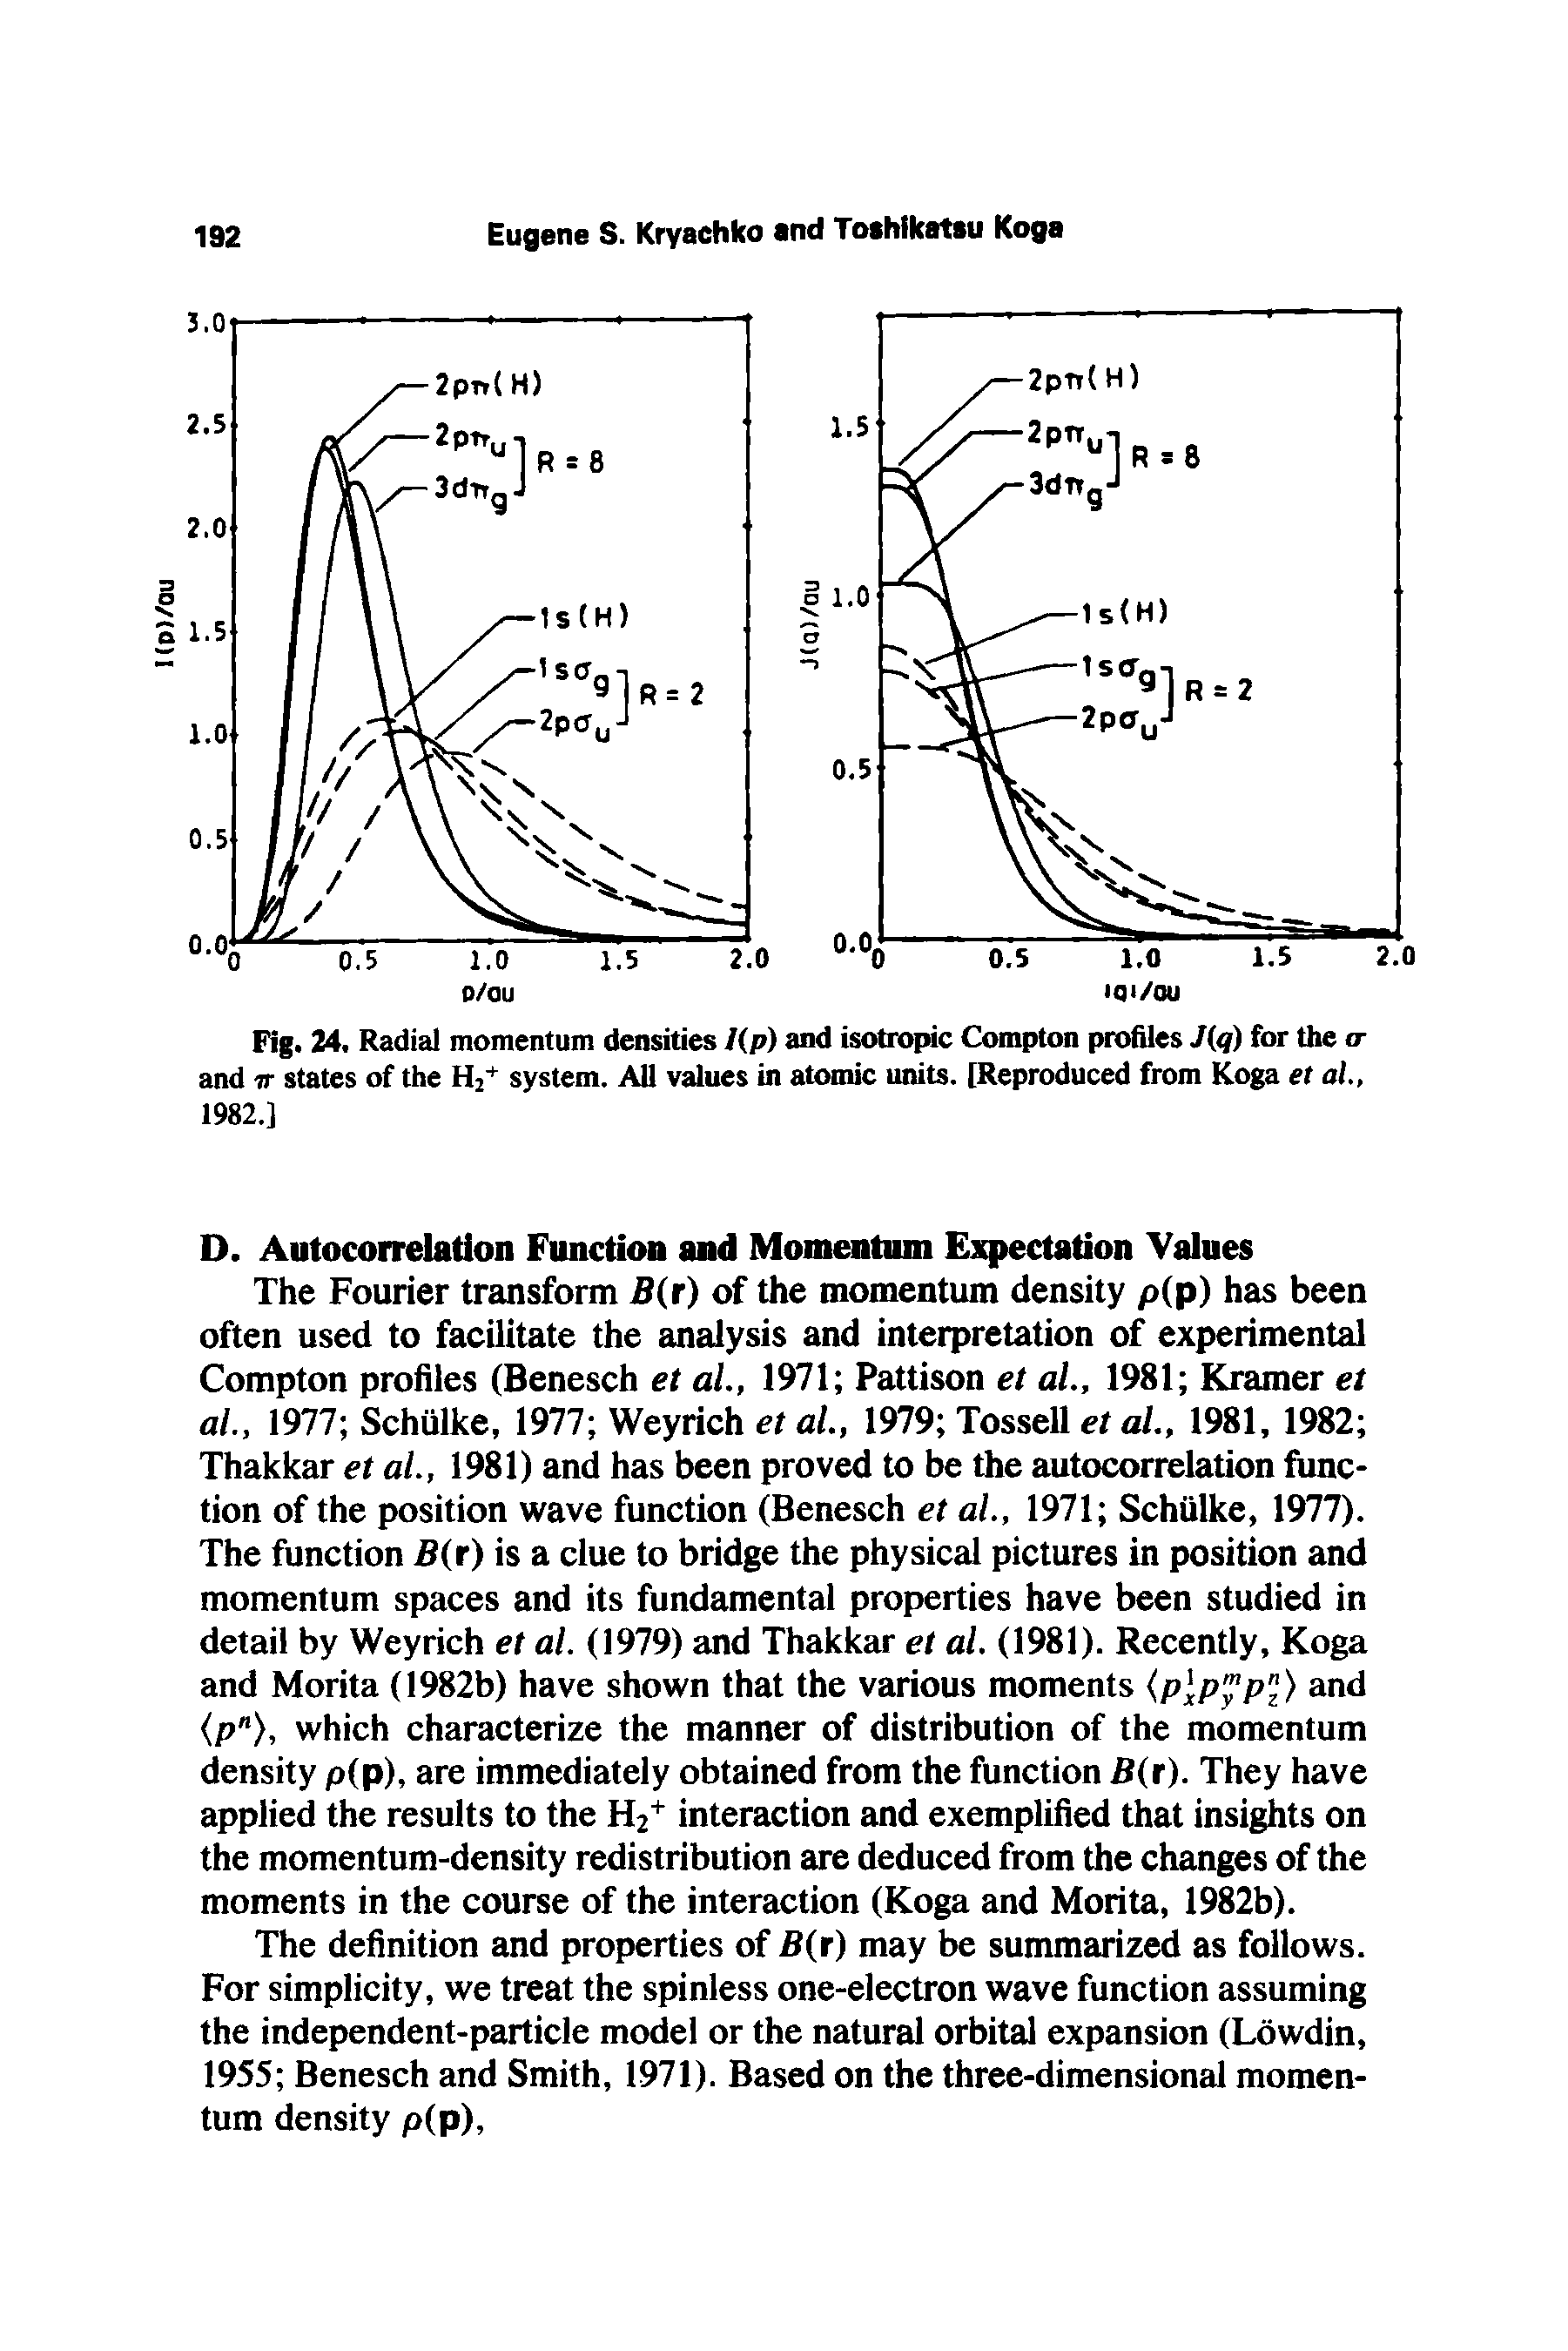 Fig. 24. Radial momentum densities l p) and isotropic Compton profiles J(q) for the o-and ir states of the H2+ system. All values in atomic units. [Reproduced from Koga et al, 1982.]...